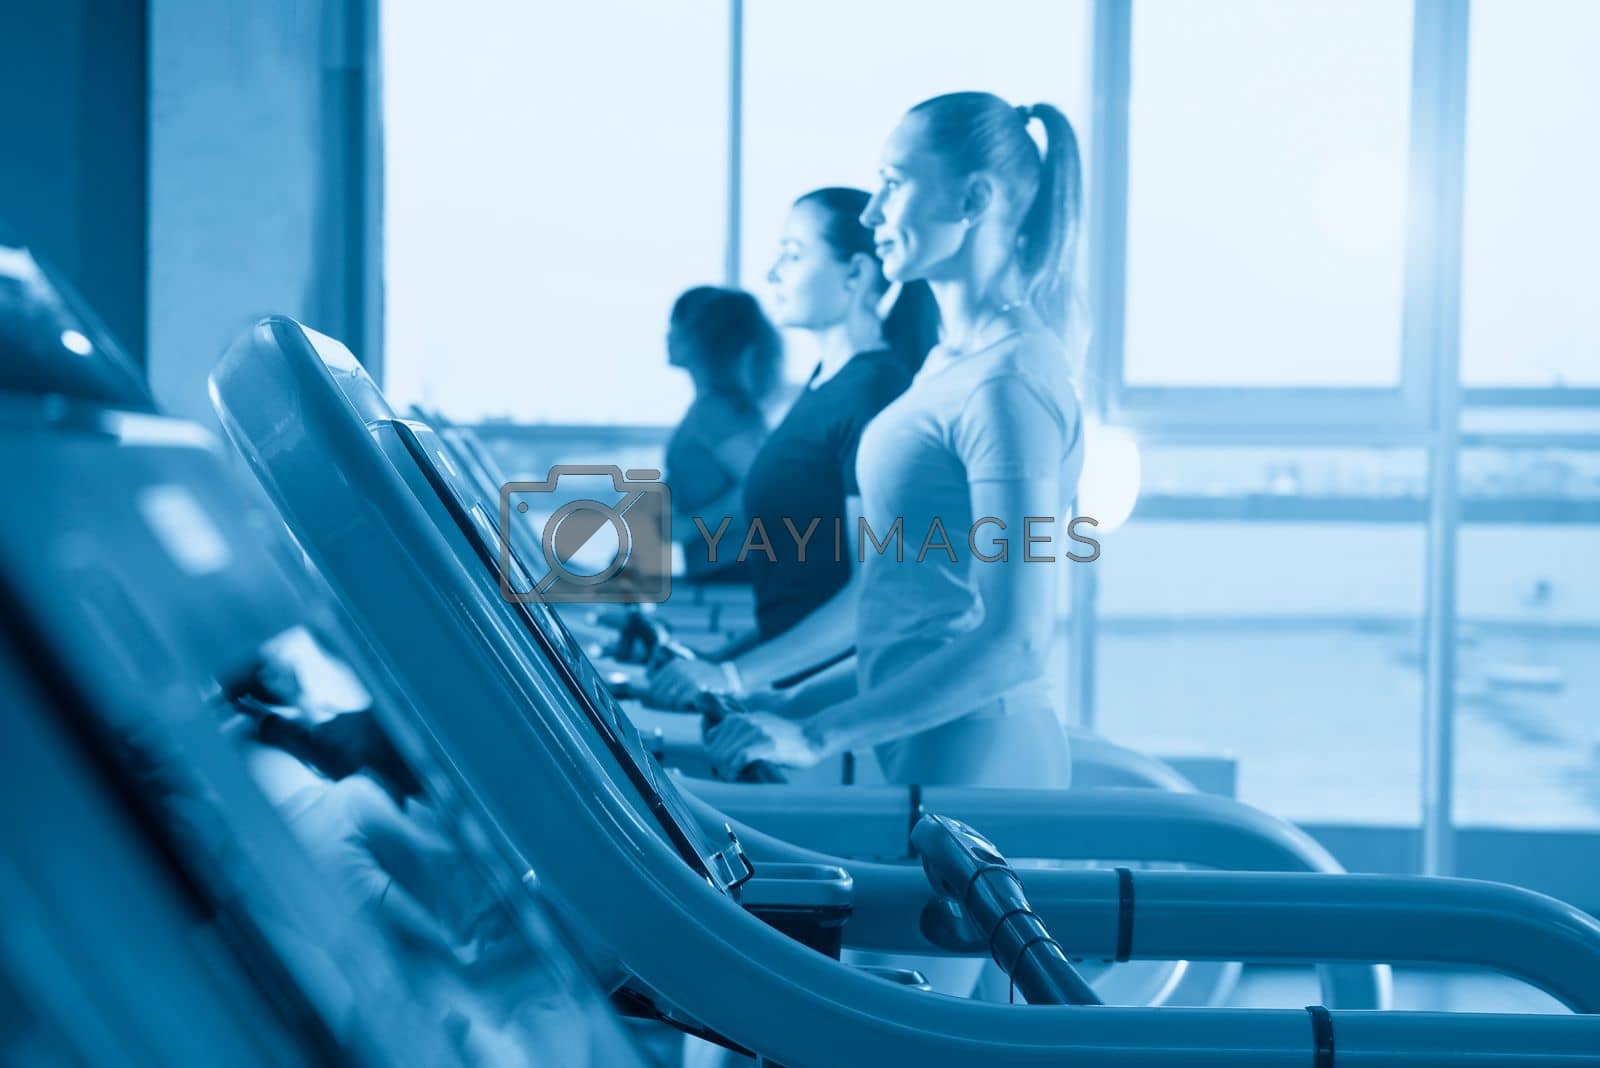 Royalty free image of group of young women running on treadmills in modern sport gym by Mariakray